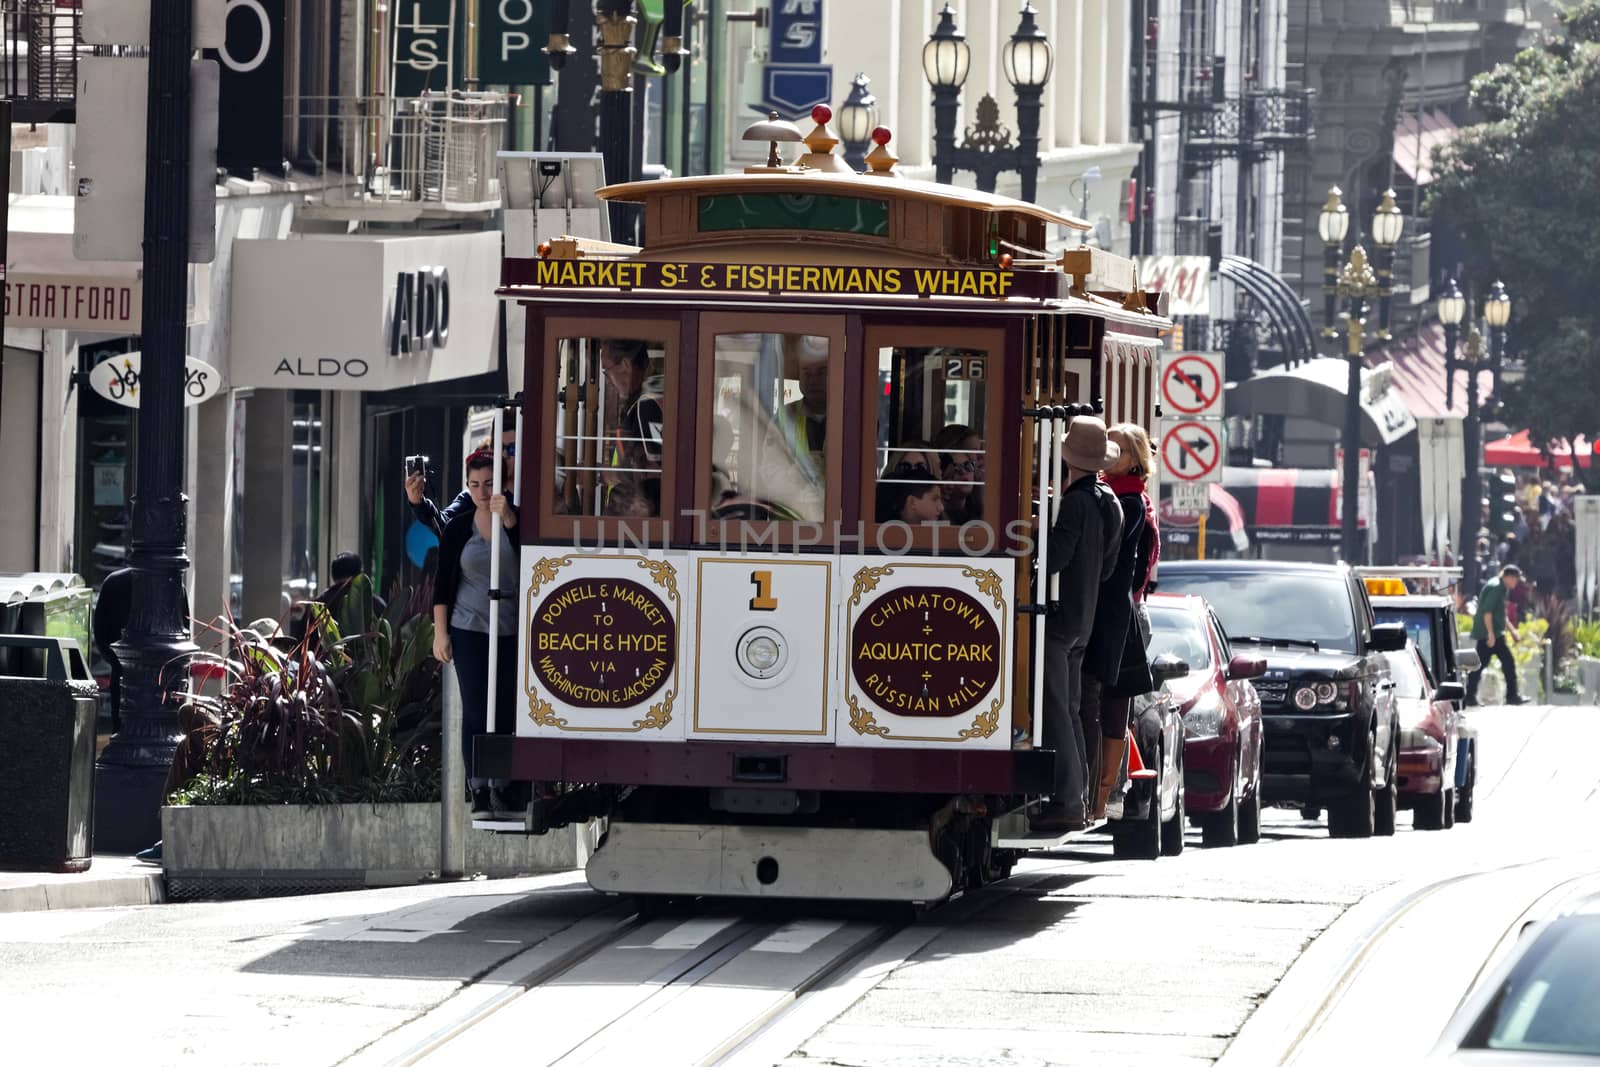 Sajn Francisco, USA - November 14, 2014: The Cable car tram. The San Francisco cable car system is world last permanently manually operated cable car system. Lines were established between 1873 and 1890.